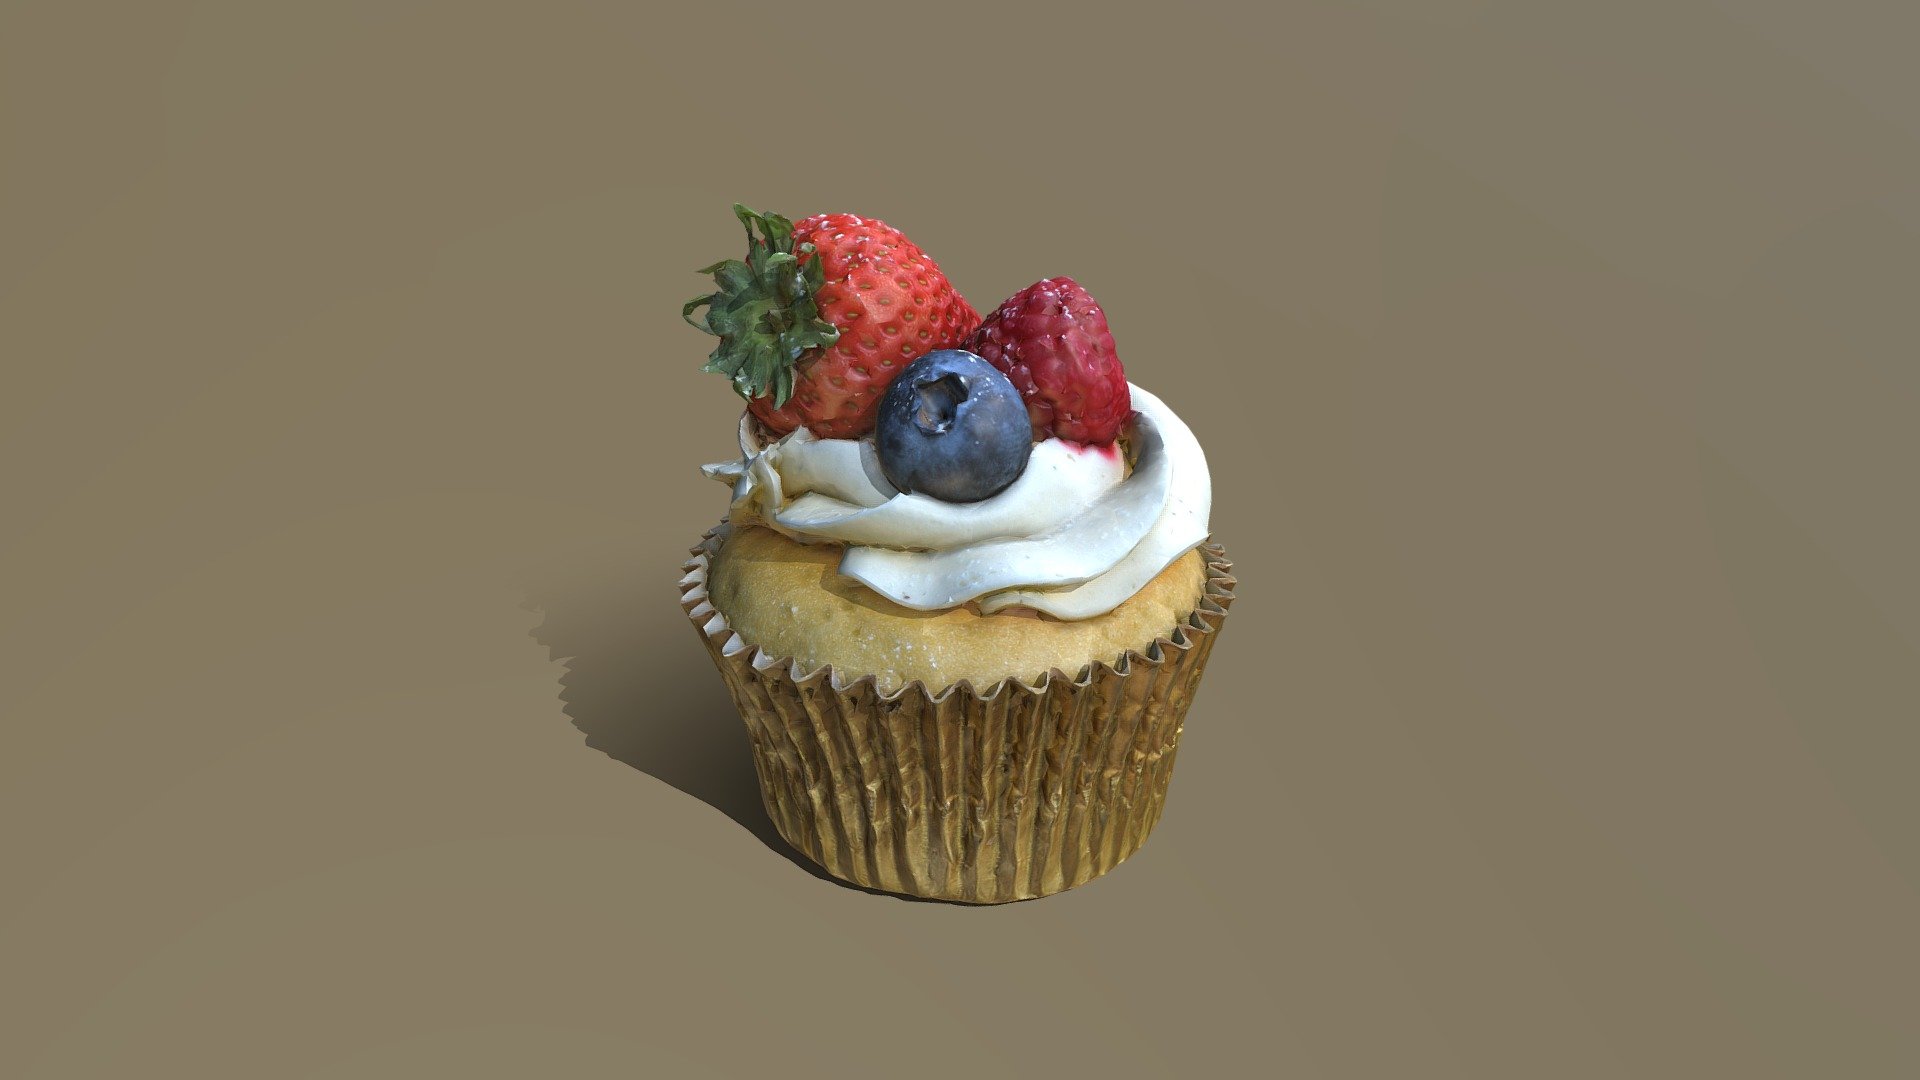 This Berries Cupcake model was created using photogrammetry which is made by CAKESBURG Premium Cake Shop in the UK. You can purchase real cake from this link: https://cakesburg.co.uk/products/cup-cakes-20x-1?_pos=1&amp;_sid=35555261d&amp;_ss=r

Textures 4096*4096px PBR photoscan-based materials Base Color, Normal Map, Roughness) - Berries Cupcake - Buy Royalty Free 3D model by Cakesburg Premium 3D Cake Shop (@Viscom_Cakesburg) 3d model